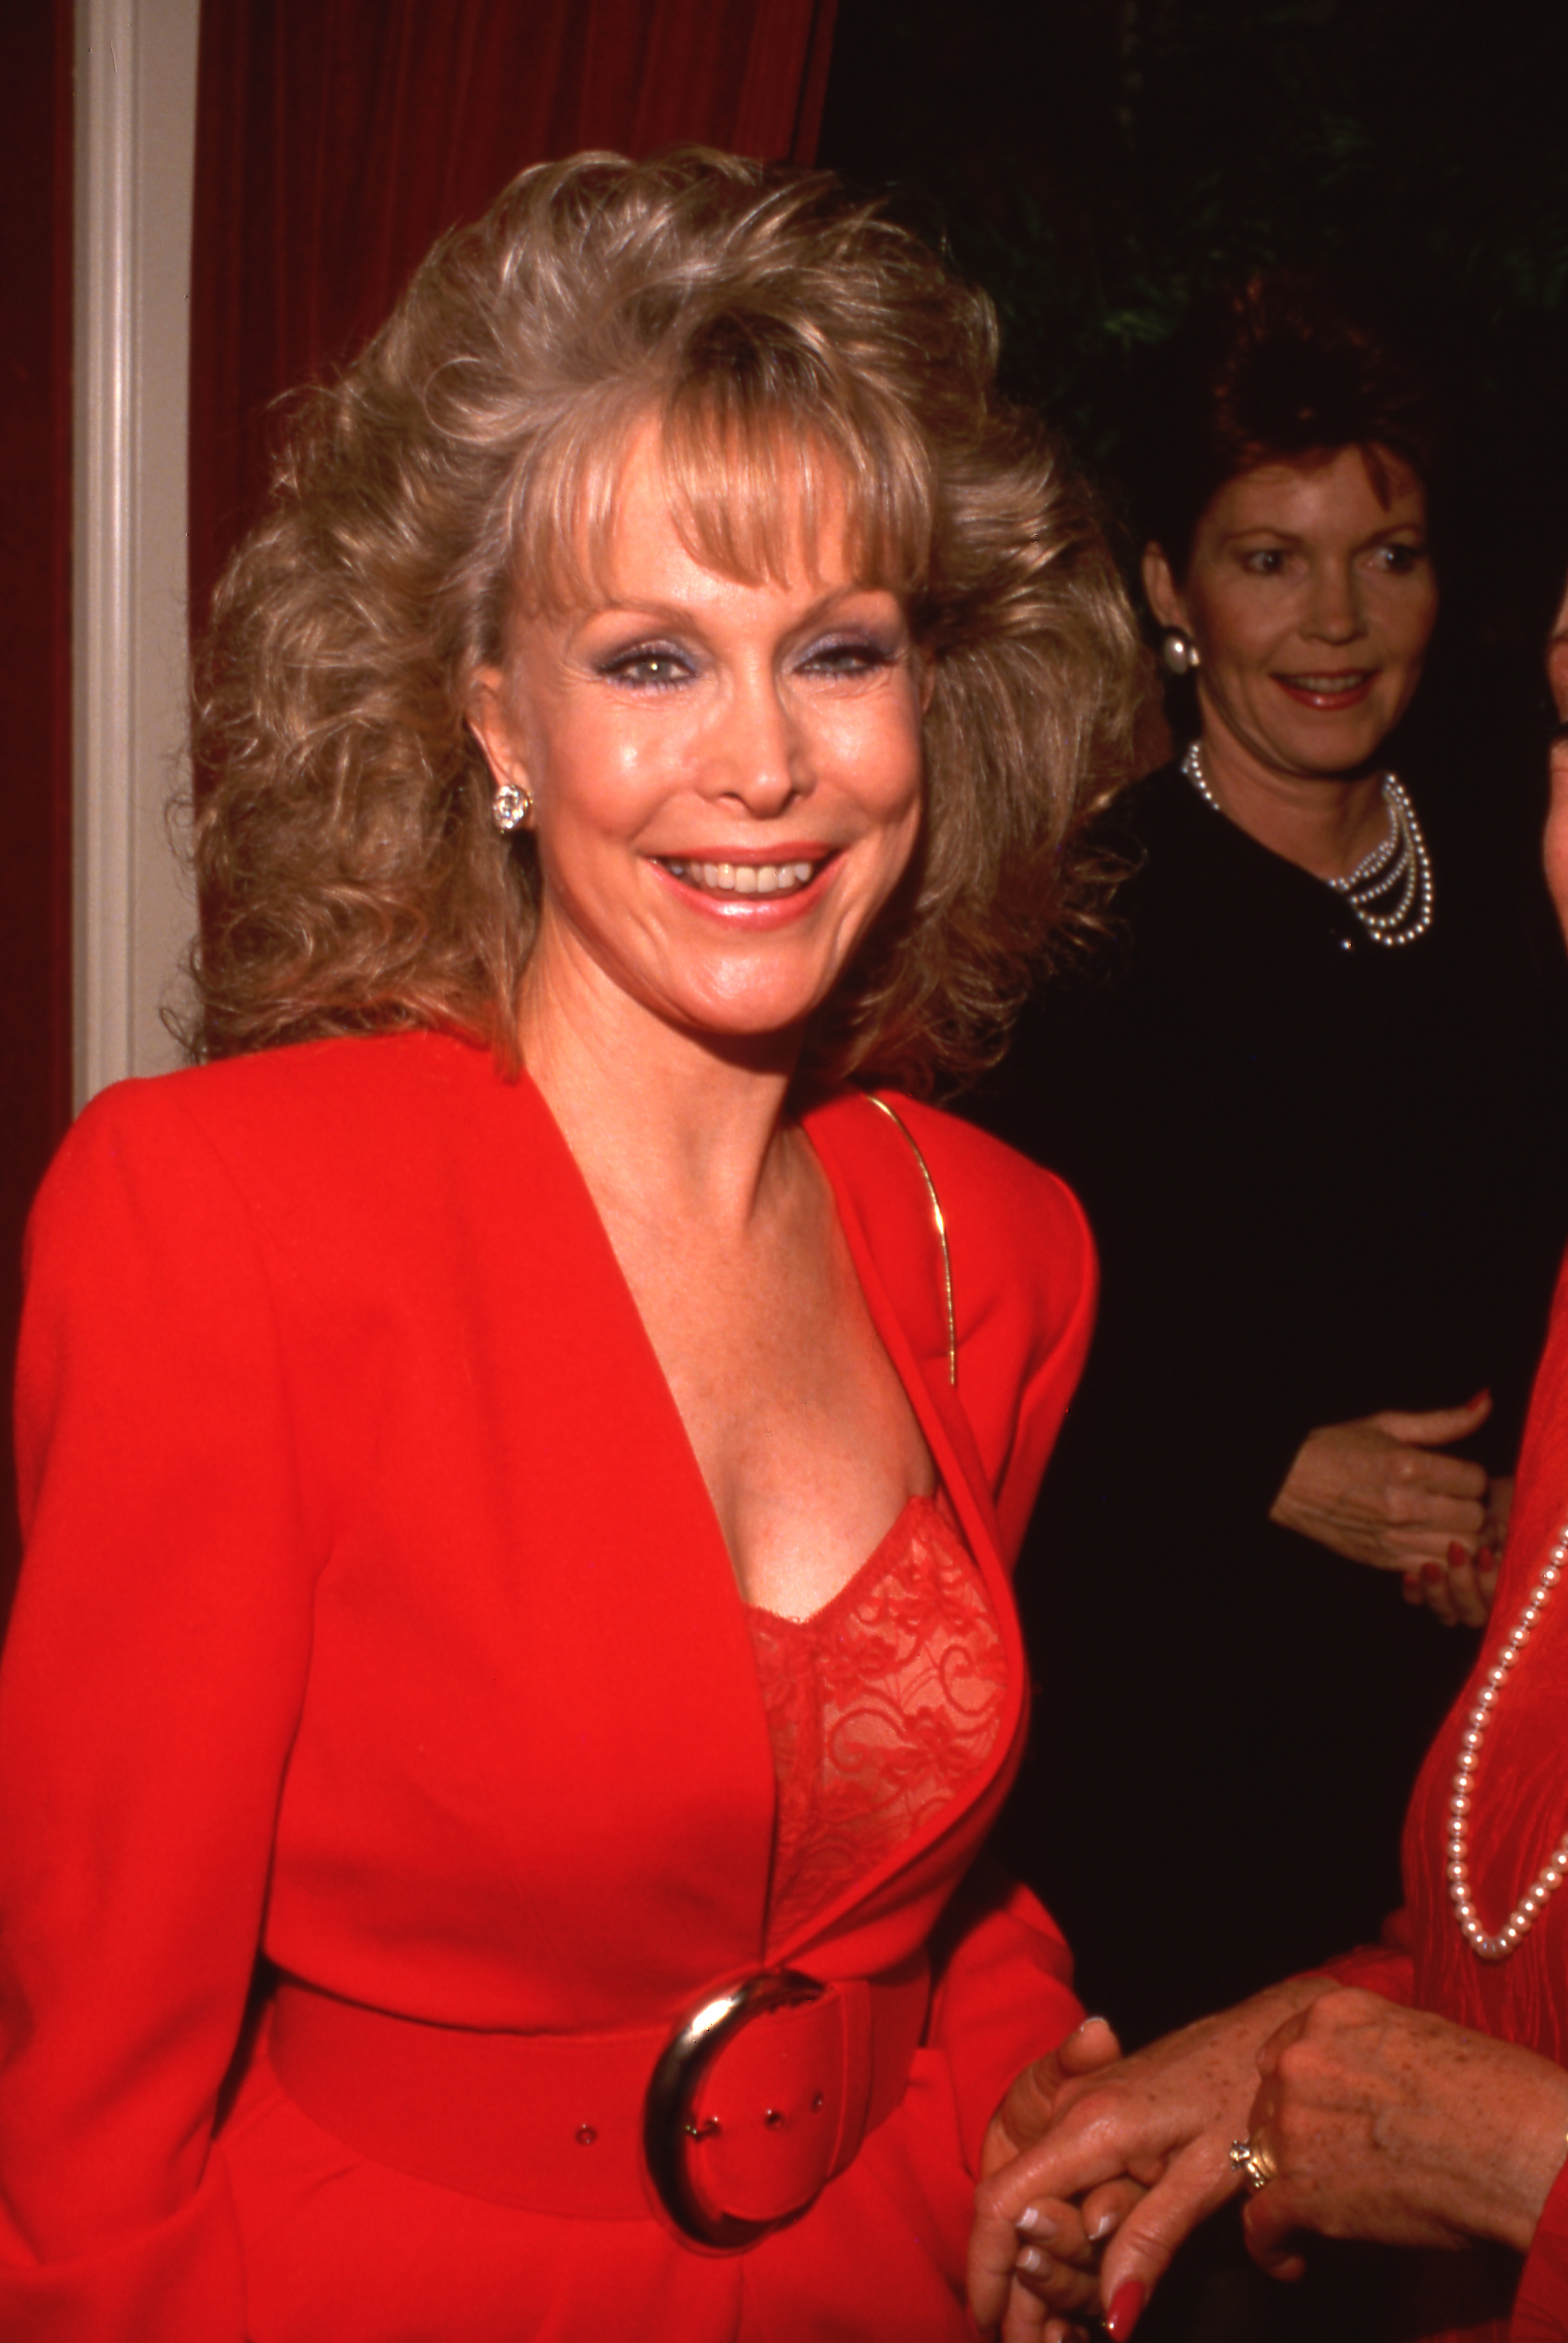 Barbara Eden wears a red suit with a lace top as she attends a party in 1980. | Source: Getty Images